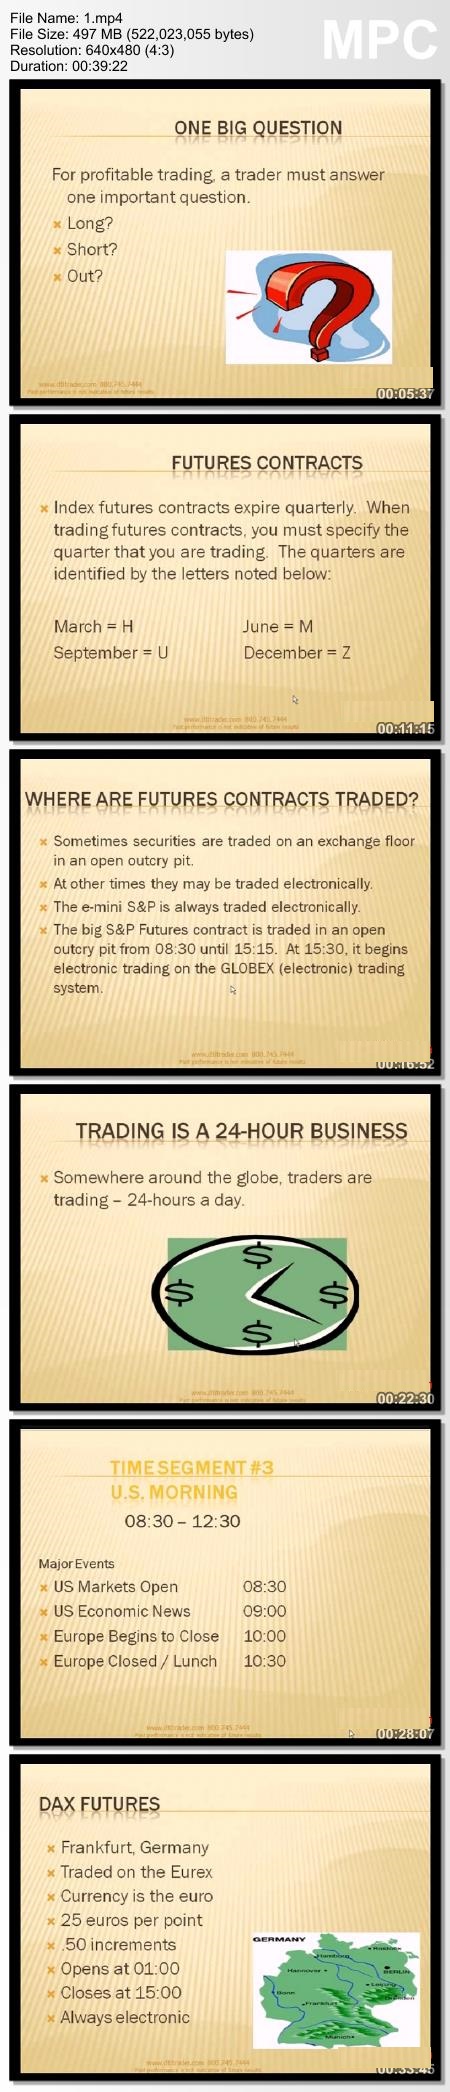 DTI Geoffrey Smith Seven Strategies for Profitable Trading